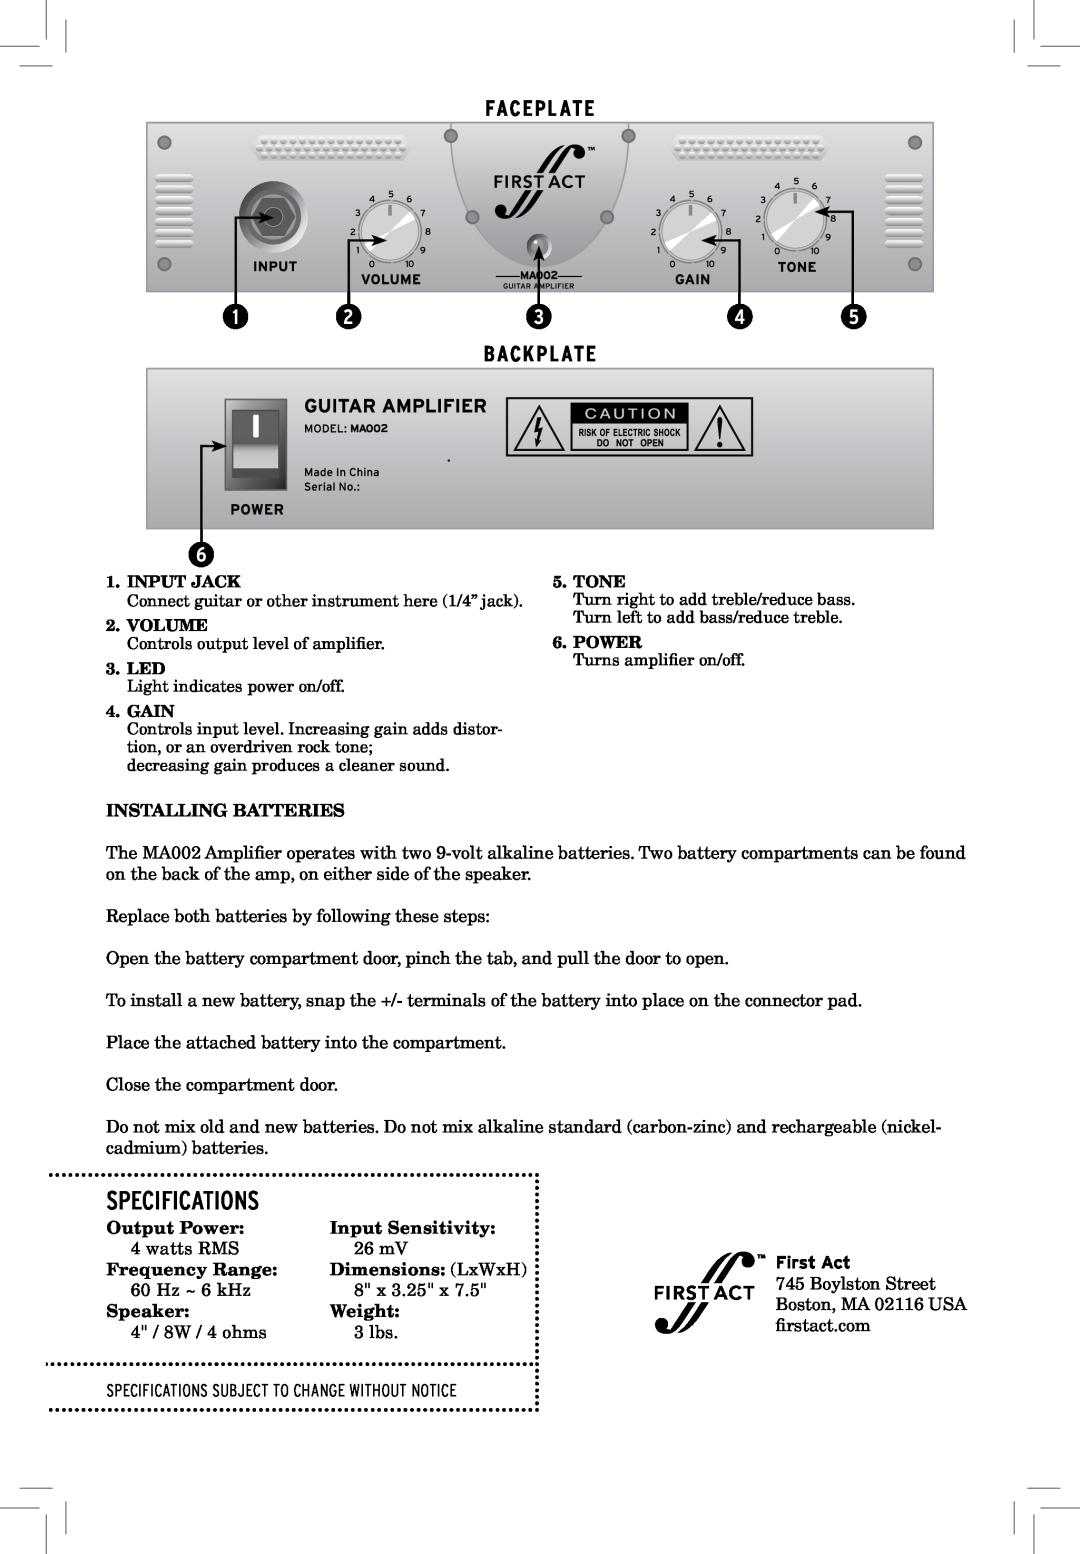 First Act MA002 specifications First Act, Specifications, Facepl Ate, Backpl Ate, Installing Batteries, Output Power 